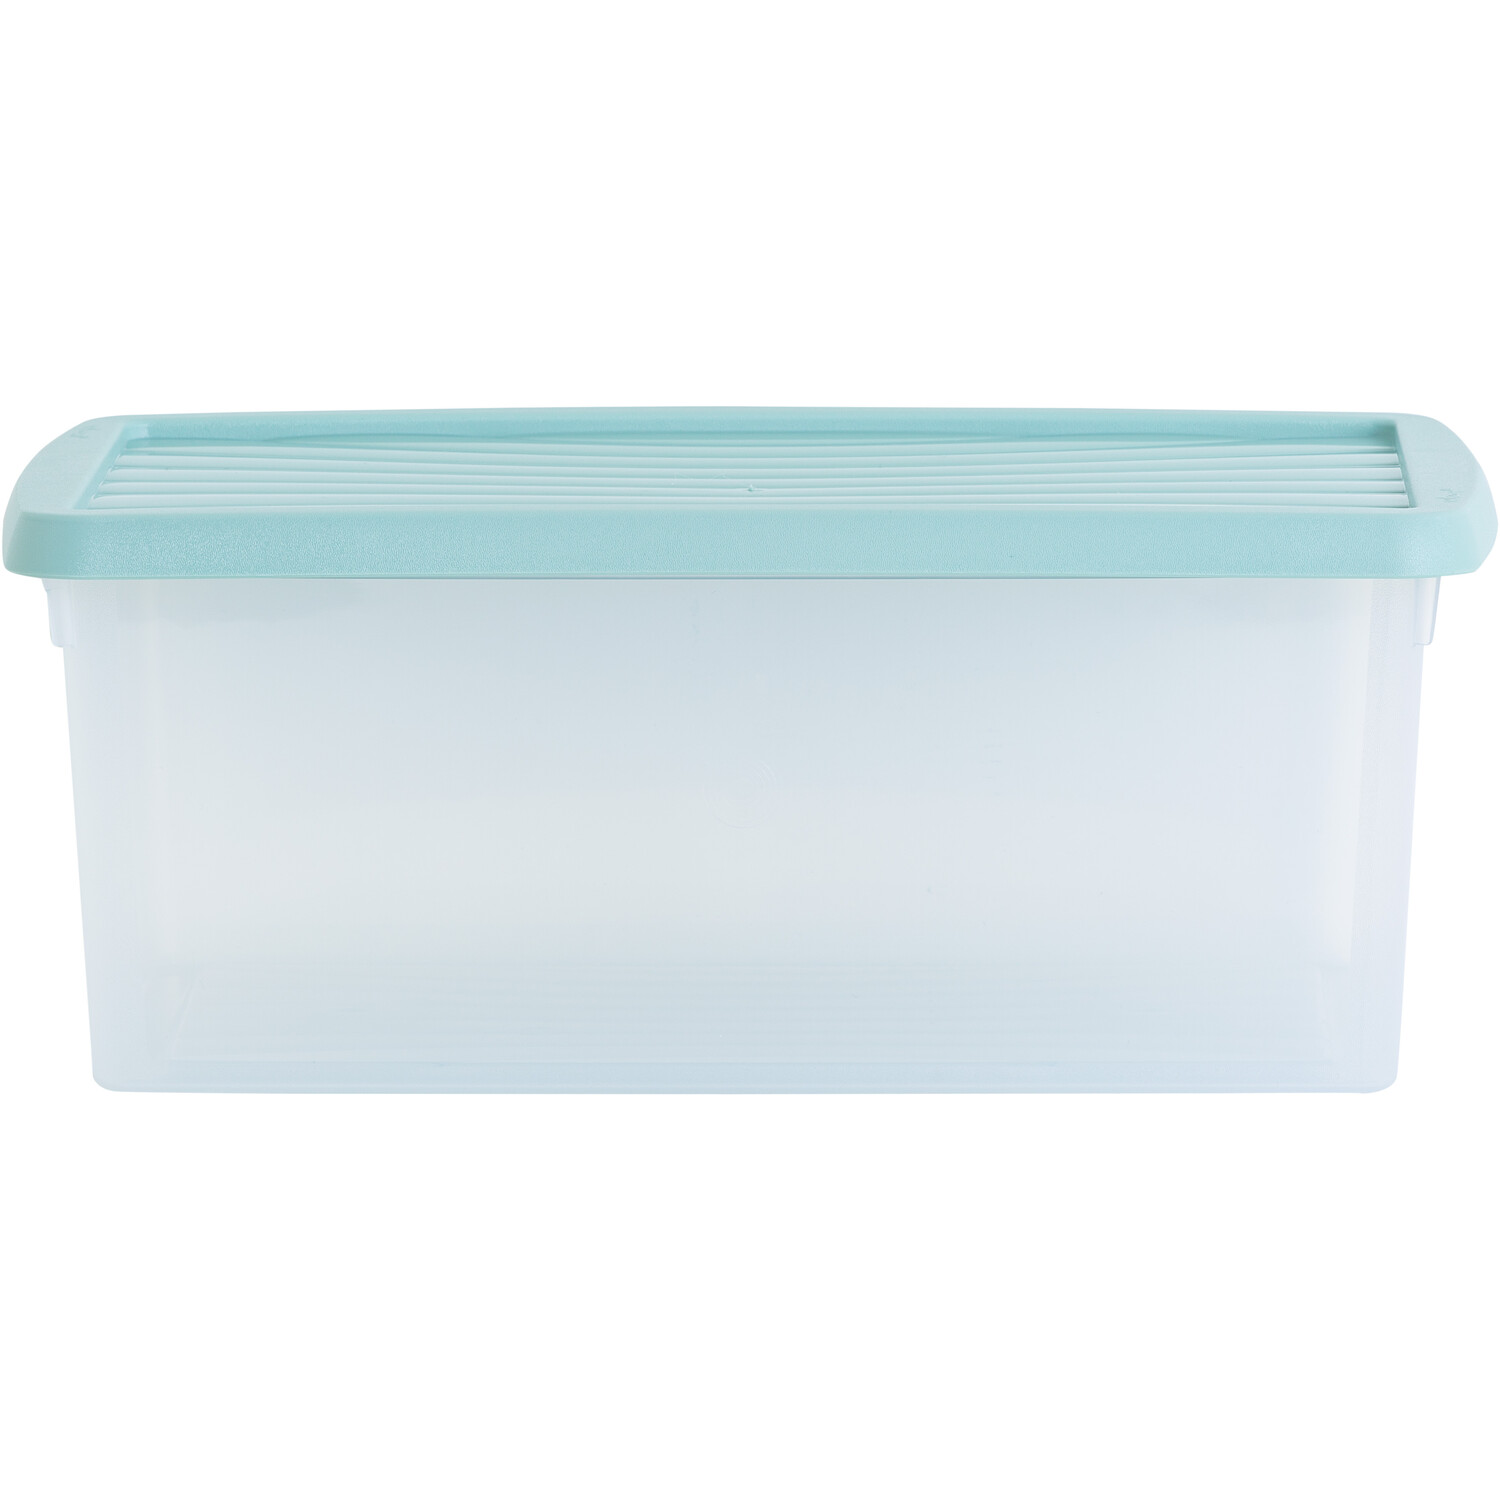 Single 9L Clear Storage Box with Clip Lid in Assorted styles Image 6